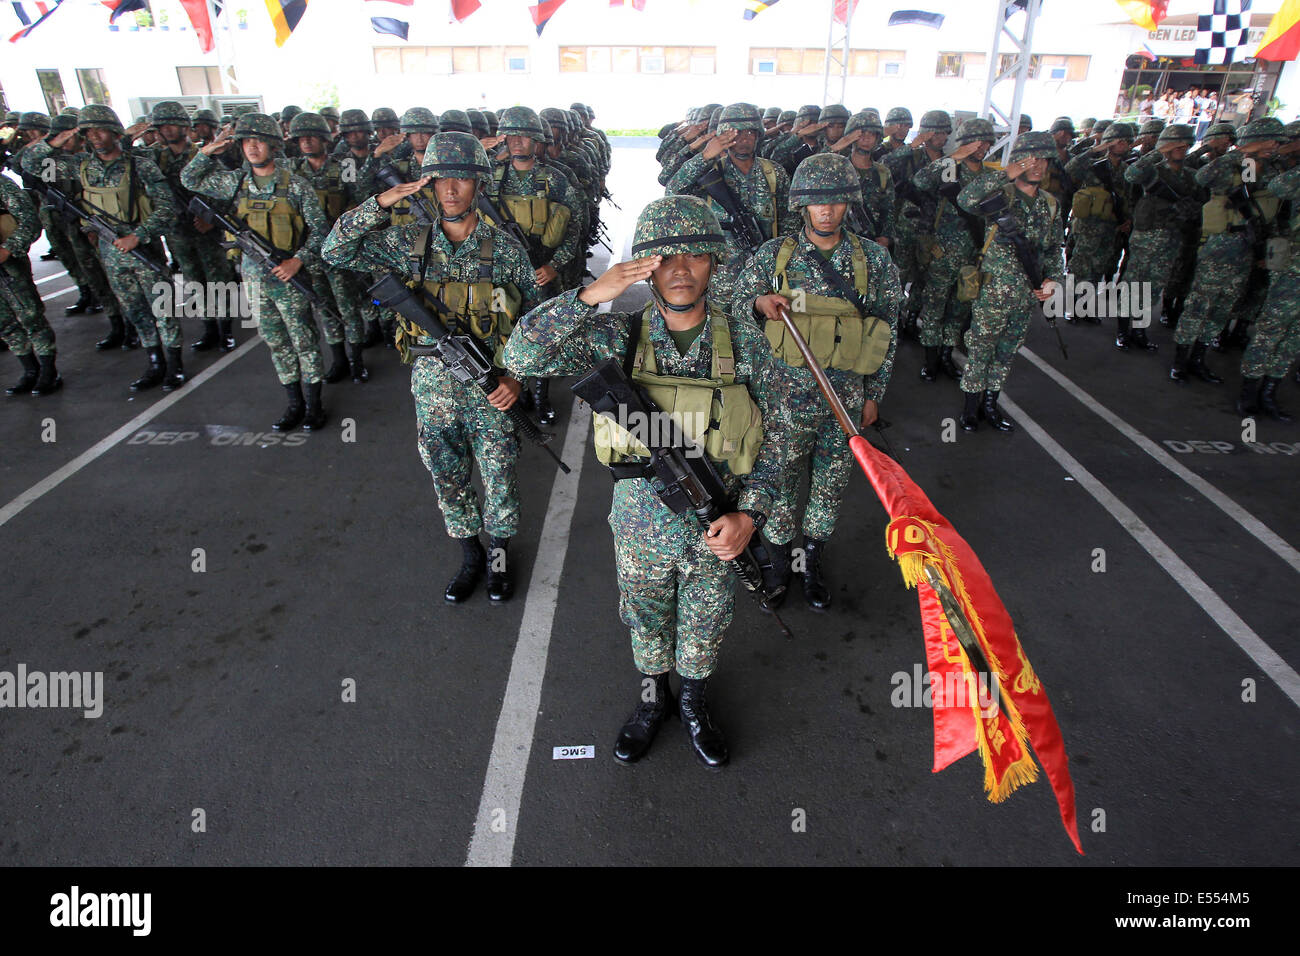 Manila, Philippines. 21st July, 2014. Members of the Marine Battalion Landing Team 5 (MBLT5) salute during arrival ceremony inside the Philippine Navy Headquarters in Manila, the Philippines, July 21, 2014. More than 200 members of the MBLT5 arrived in Manila after serving almost 10 years in Northern Philippines. Credit:  Rouelle Umali/Xinhua/Alamy Live News Stock Photo